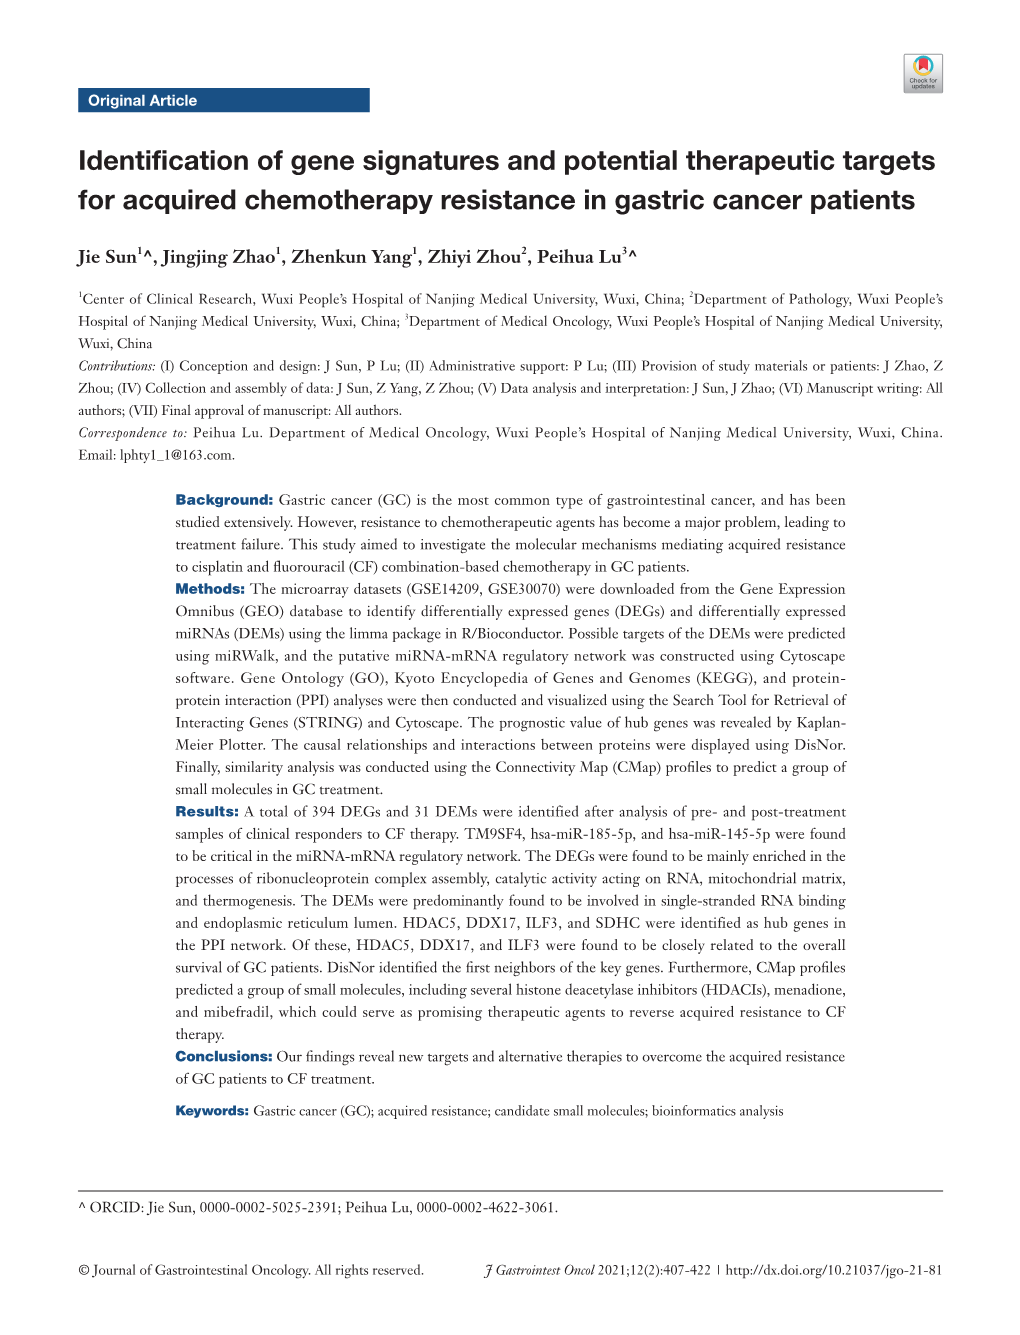 Identification of Gene Signatures and Potential Therapeutic Targets for Acquired Chemotherapy Resistance in Gastric Cancer Patients